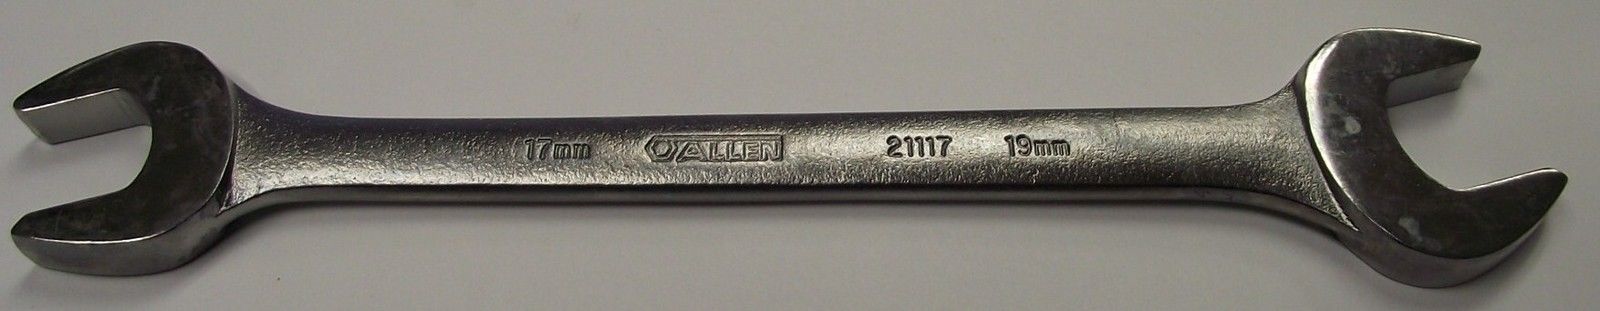 Allen 21117 17mm to 19mm Open End Wrench USA